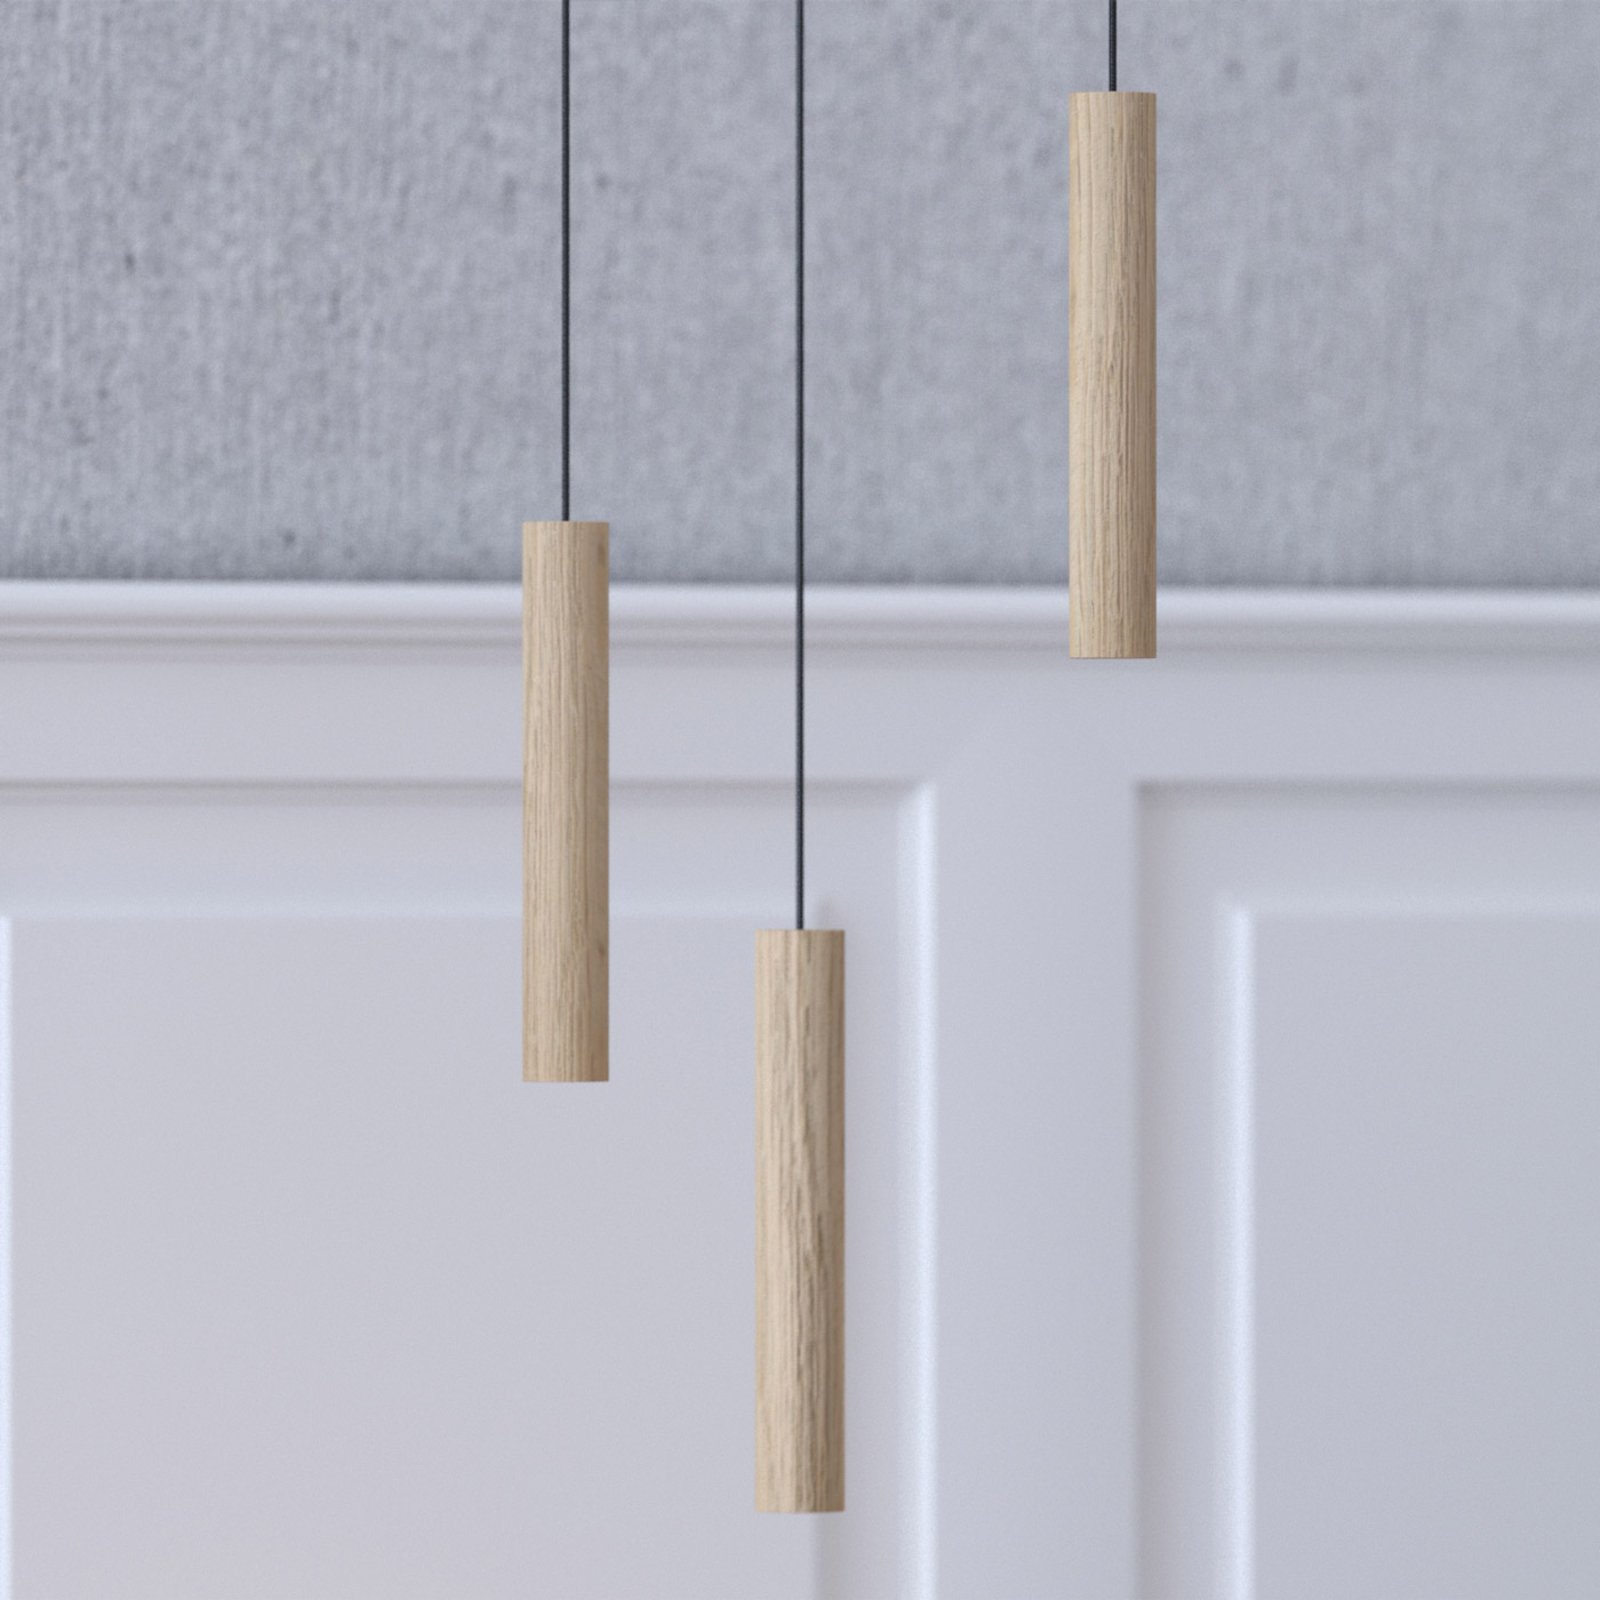 UMAGE Chimes Tall LED-Pendelleuchte Eiche hell